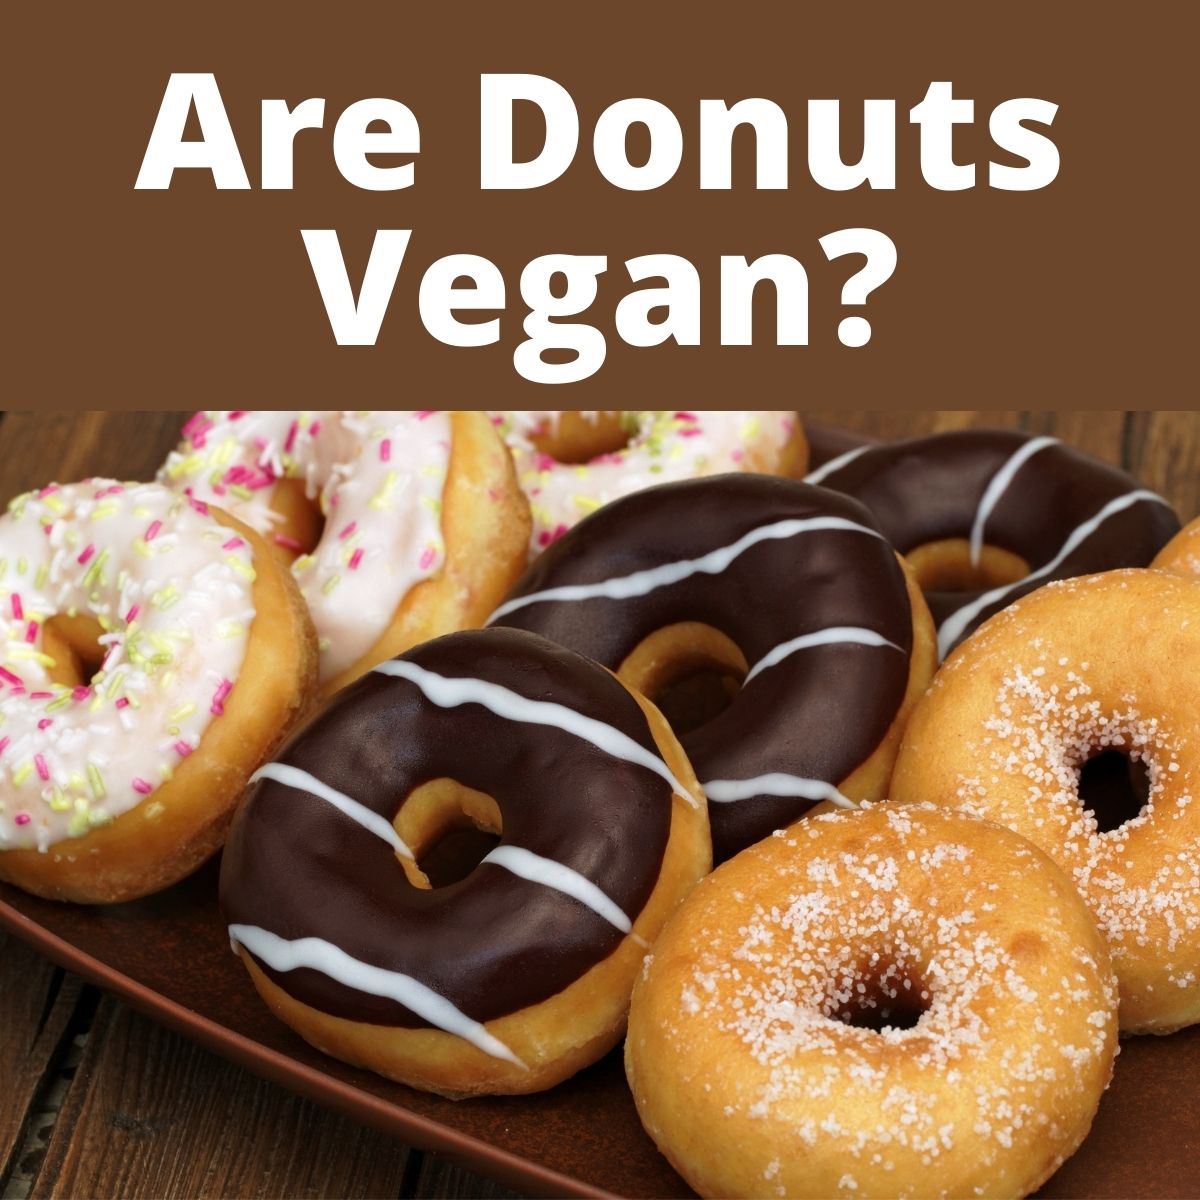 Rows of donuts with text that says Are Donuts Vegan?